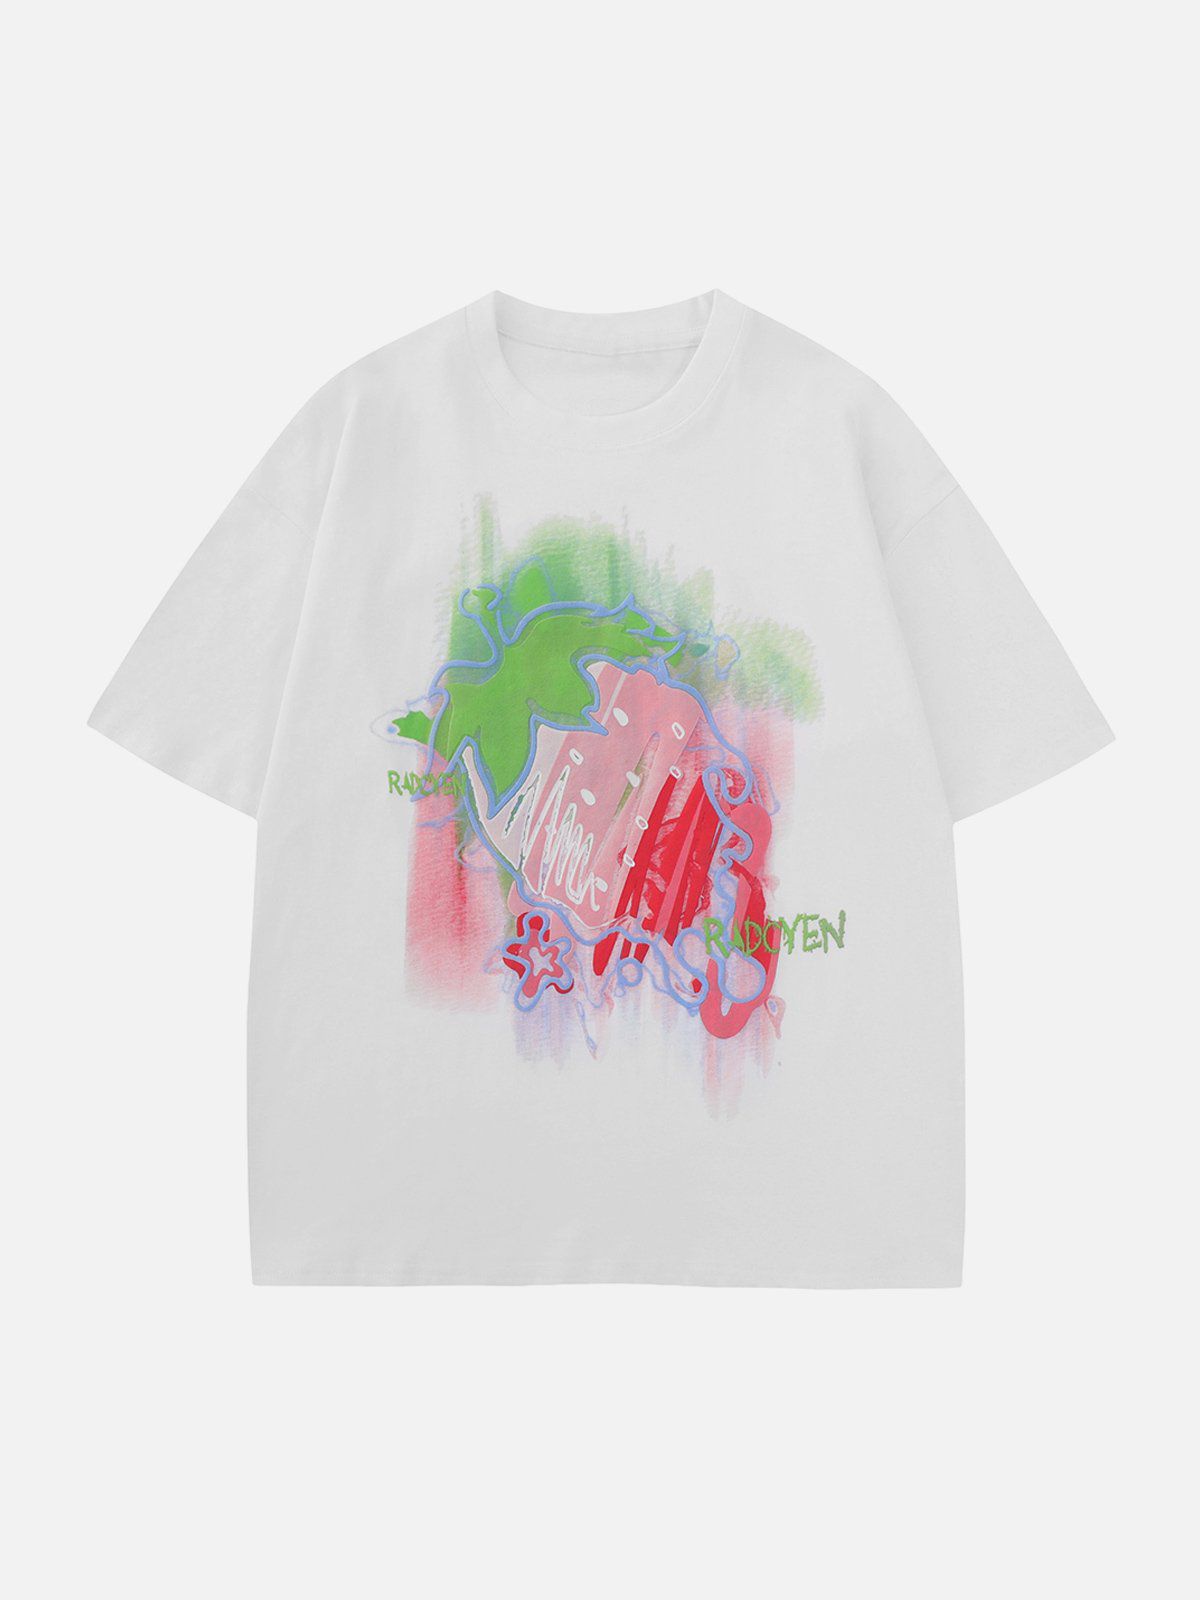 Sneakerland™ - Strawberry Embroidery Tee